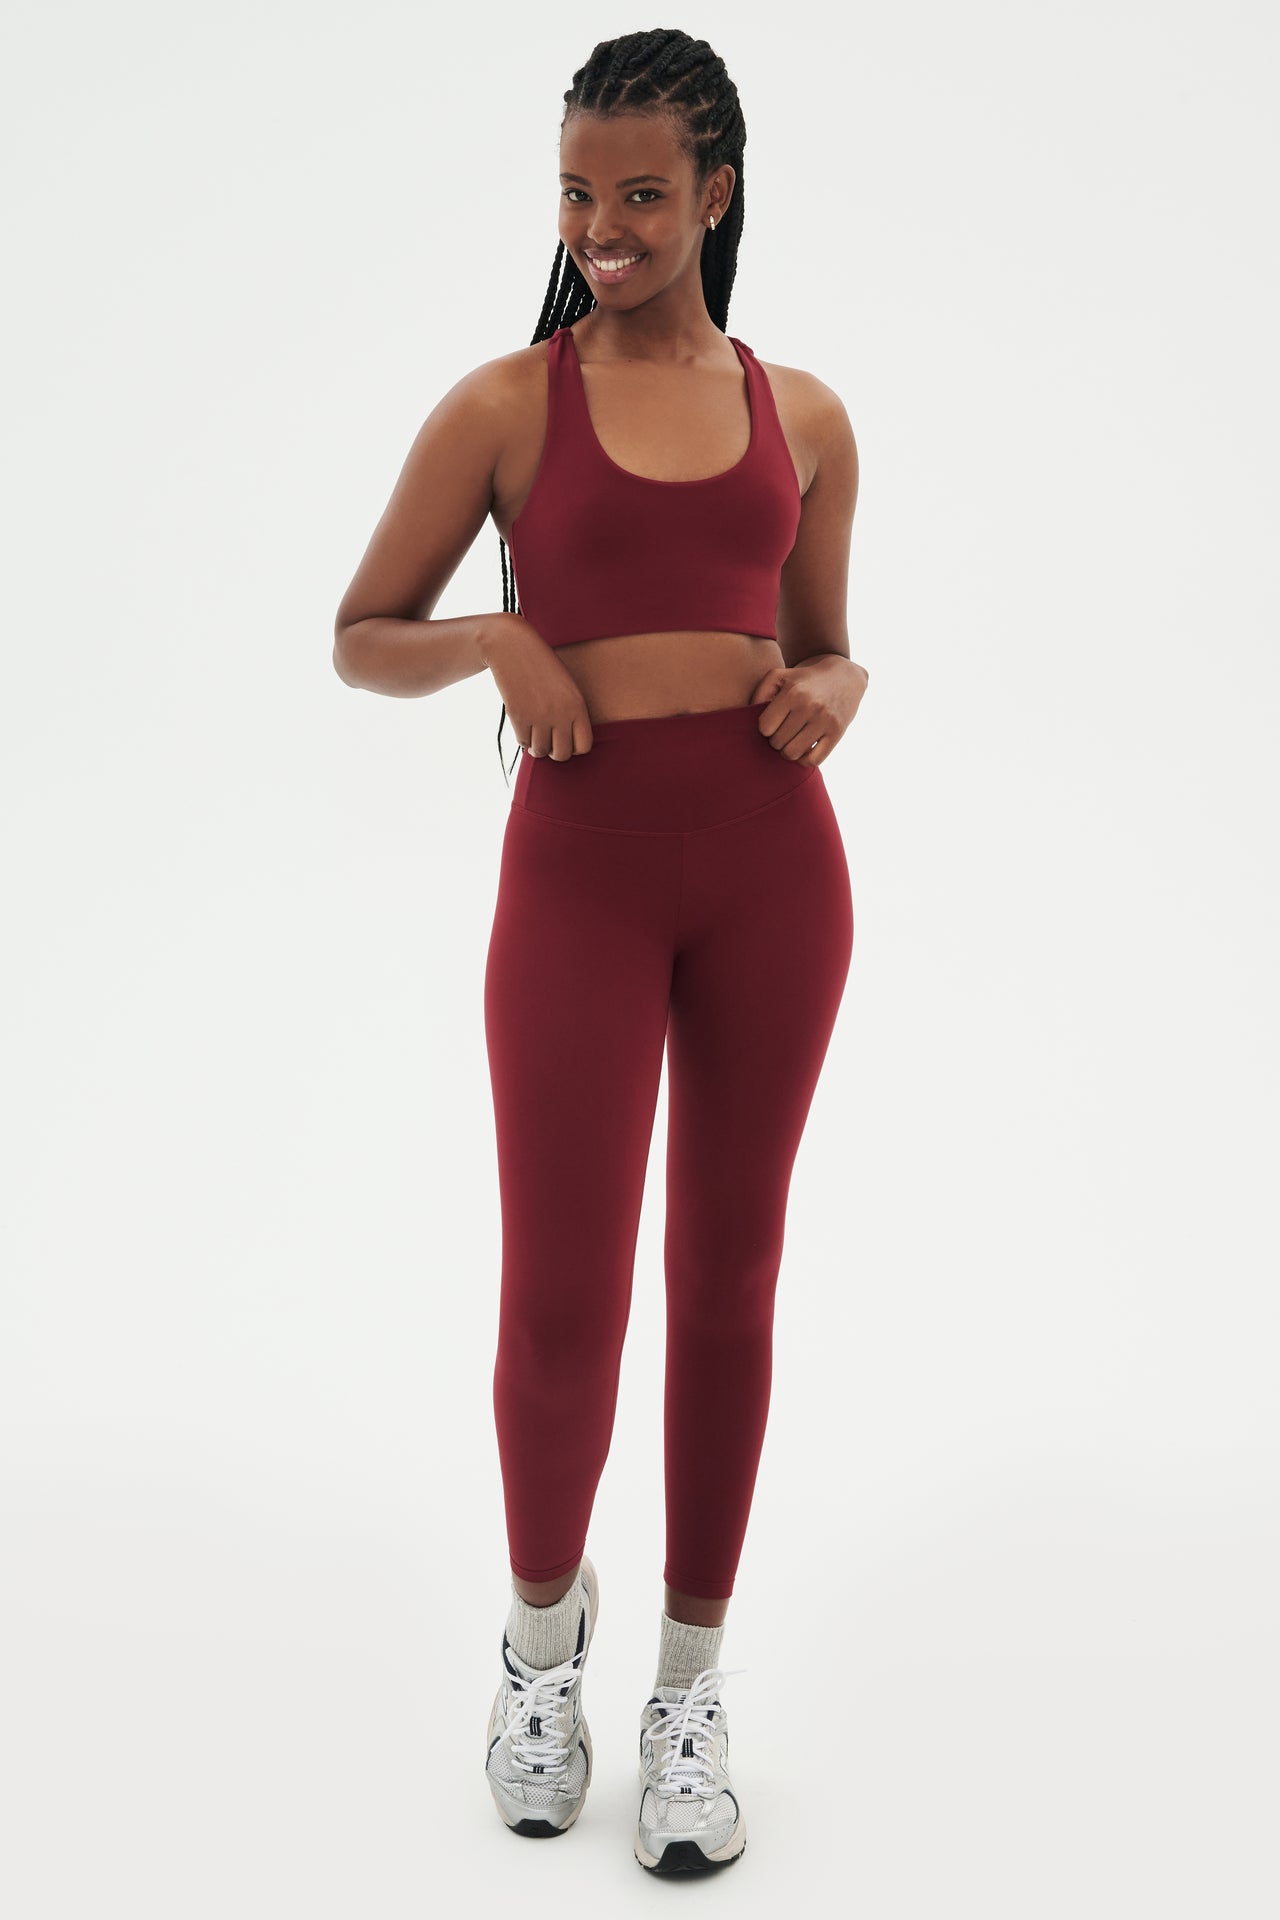 Full front view of girl wearing highwasited dark red leggings with dark red sports bra and grey shoes